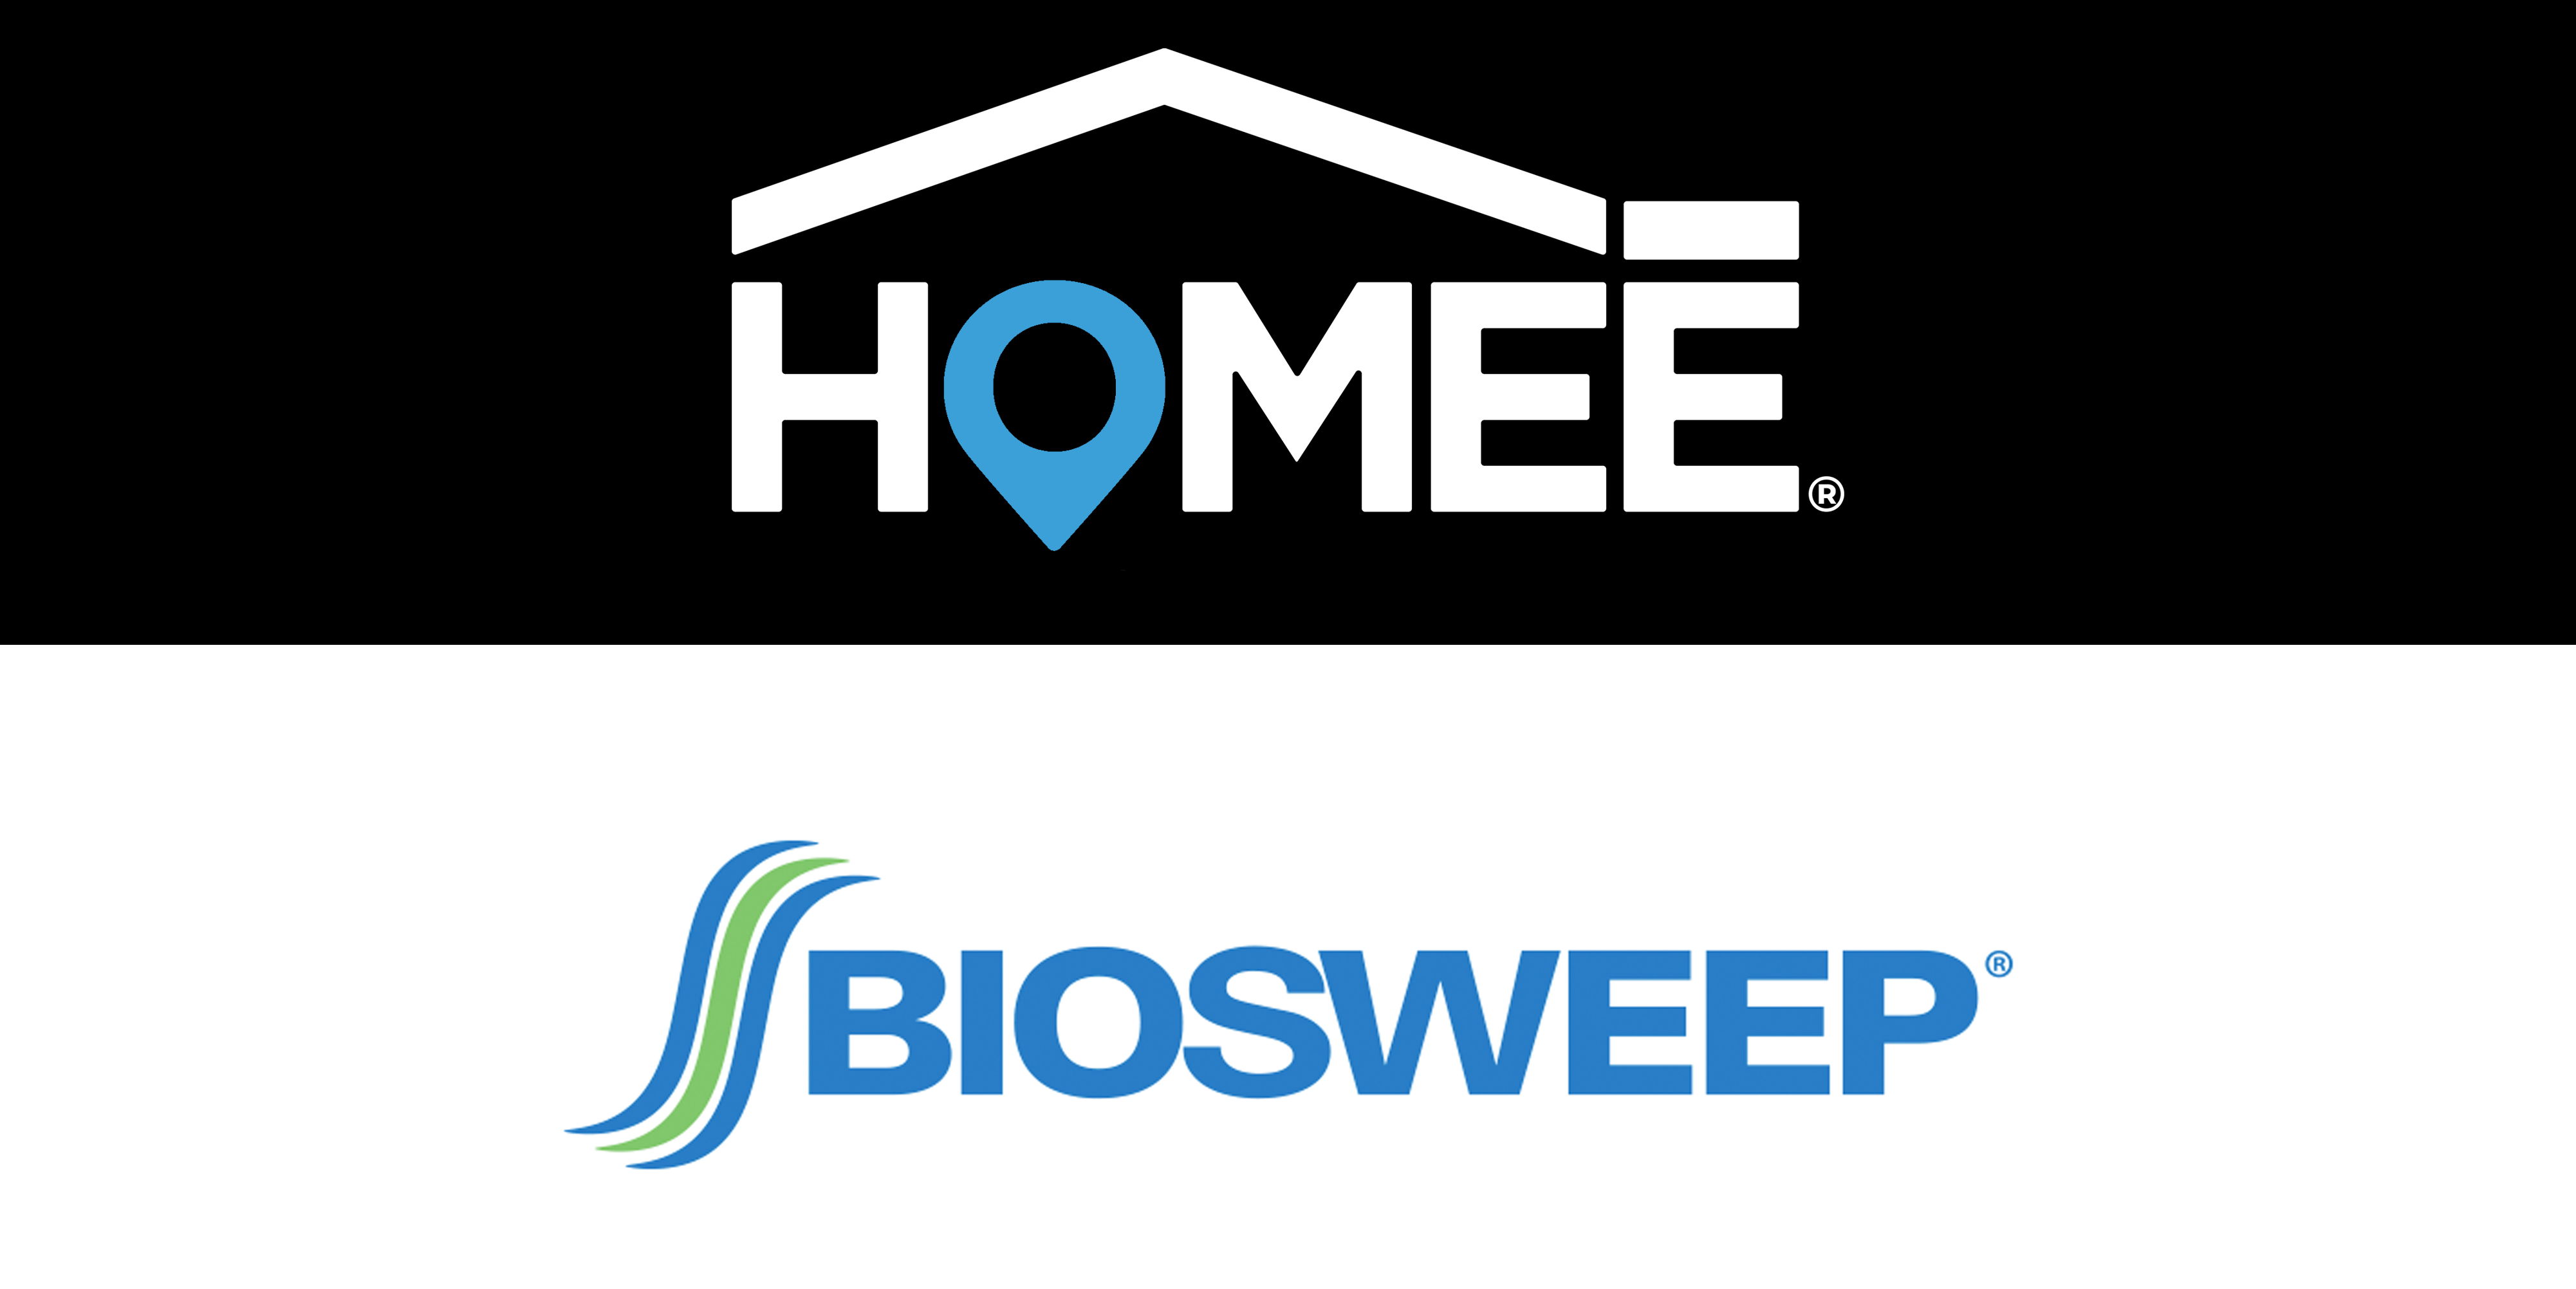 HOMEE Announces National Partnership with BIOSWEEP Services: